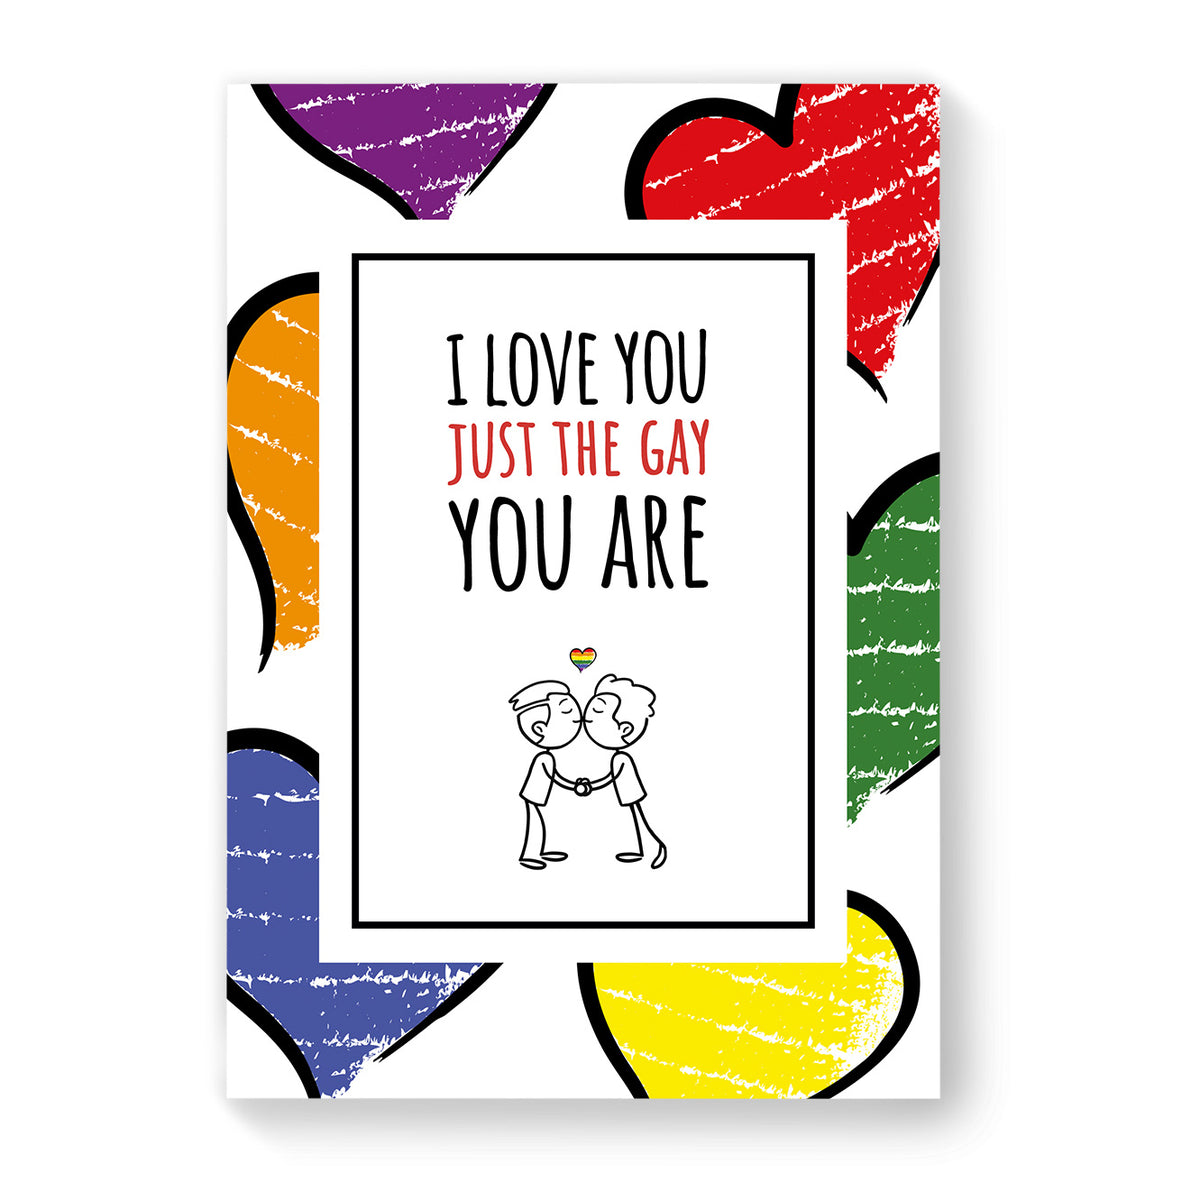 I love you just the gay you are - Gay Couple Card - Large Heart | Gift